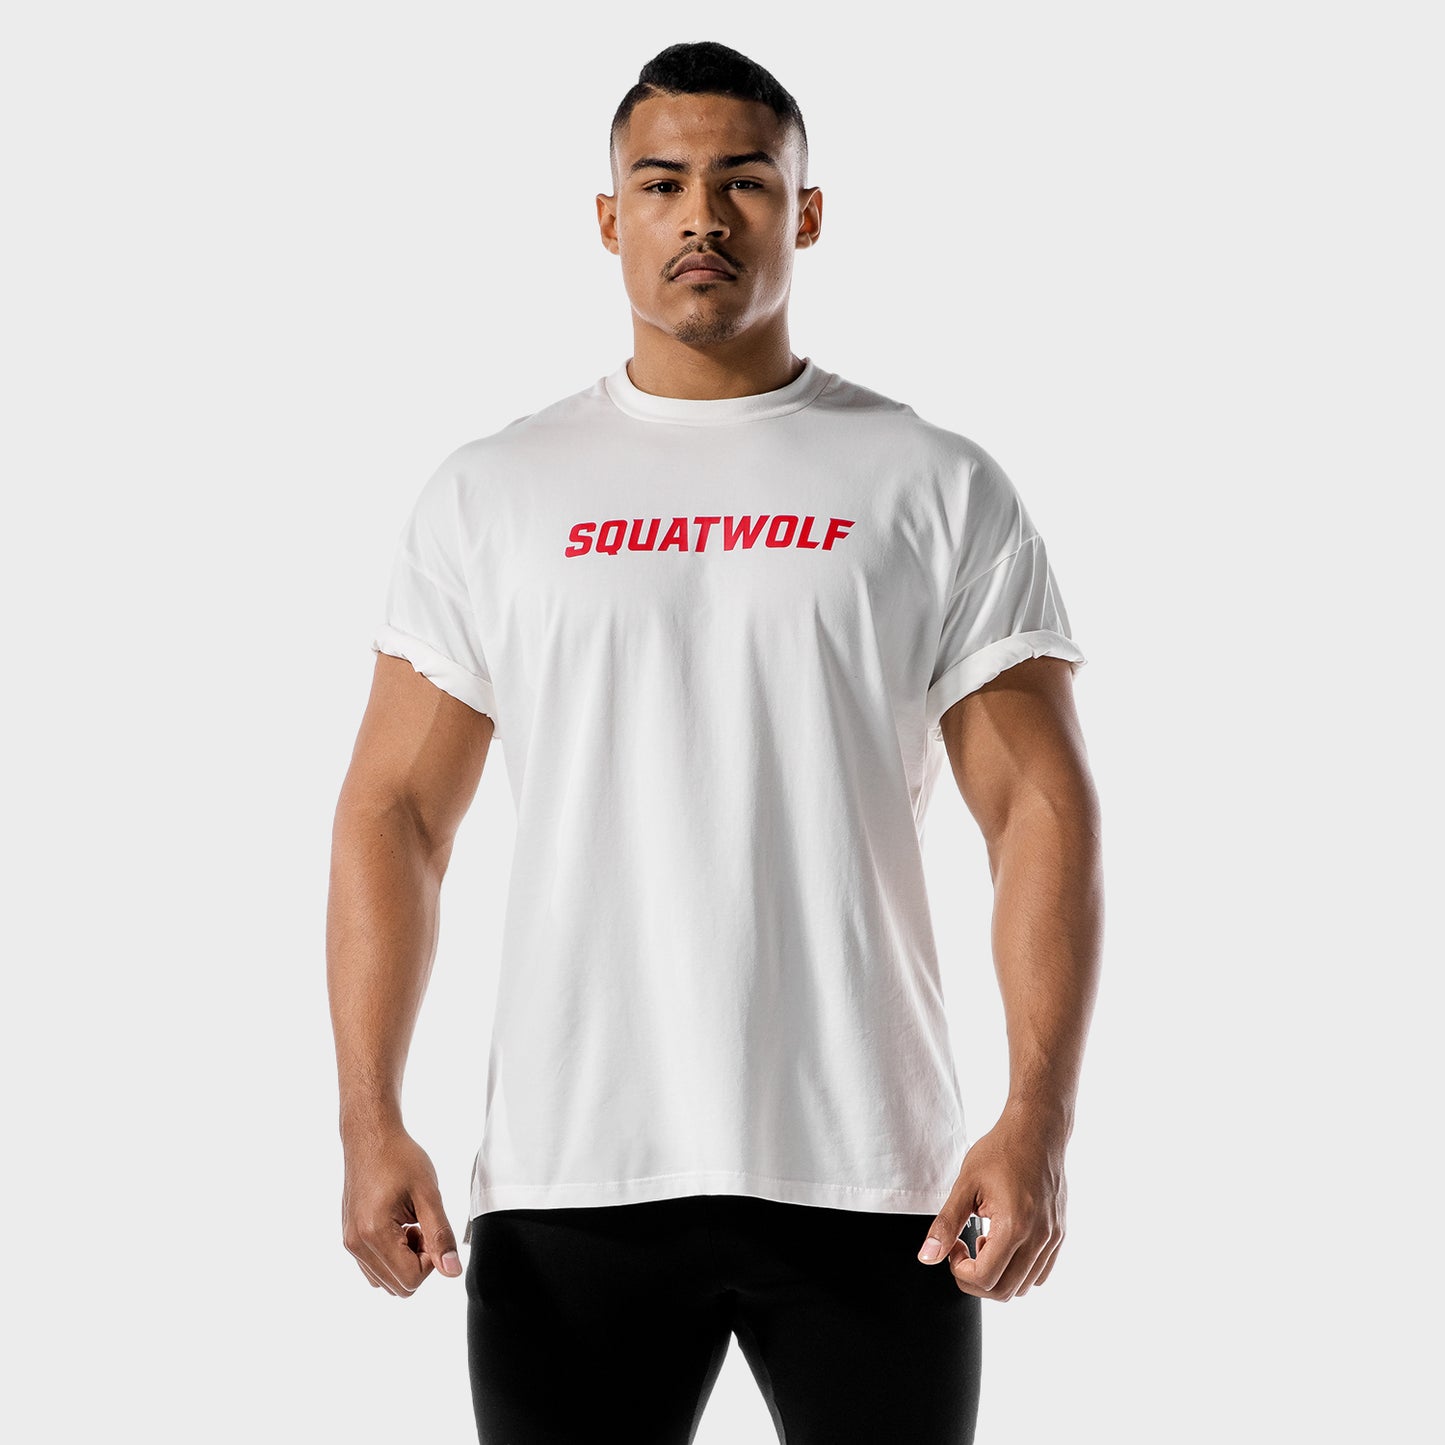 squatwolf-gym-t-shirts-for-women-iconic-oversize-tee-white-workout-clothes